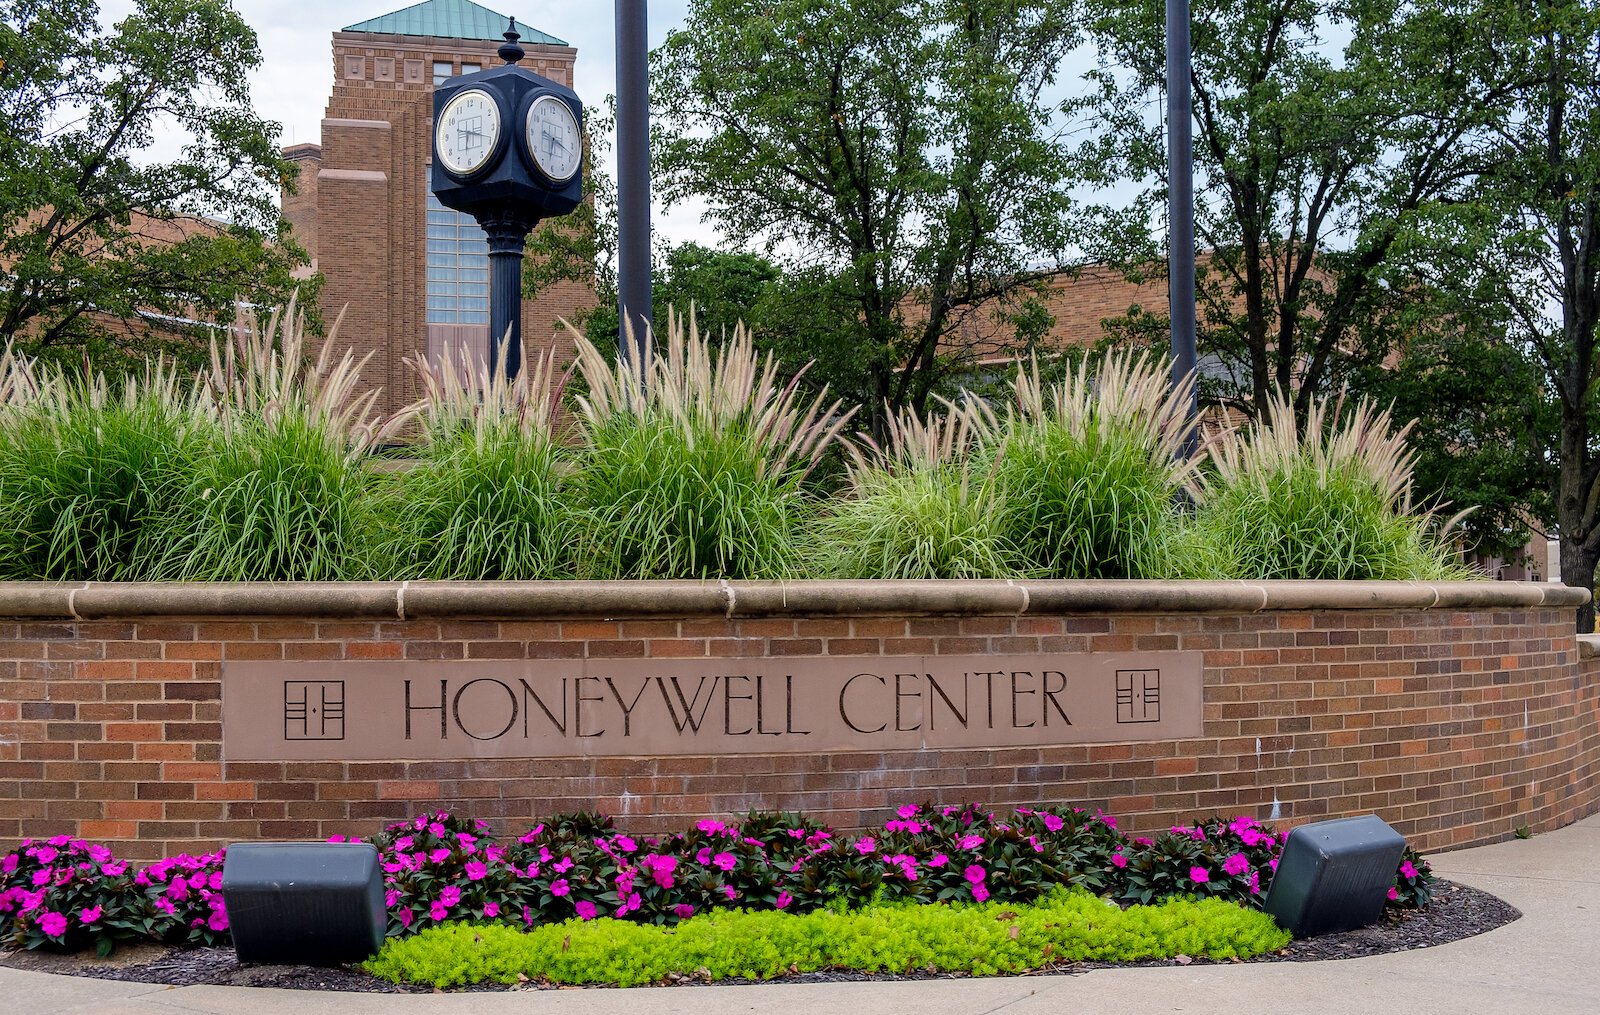 The Honeywell Center at 275 W Market St. in Downtown Wabash.